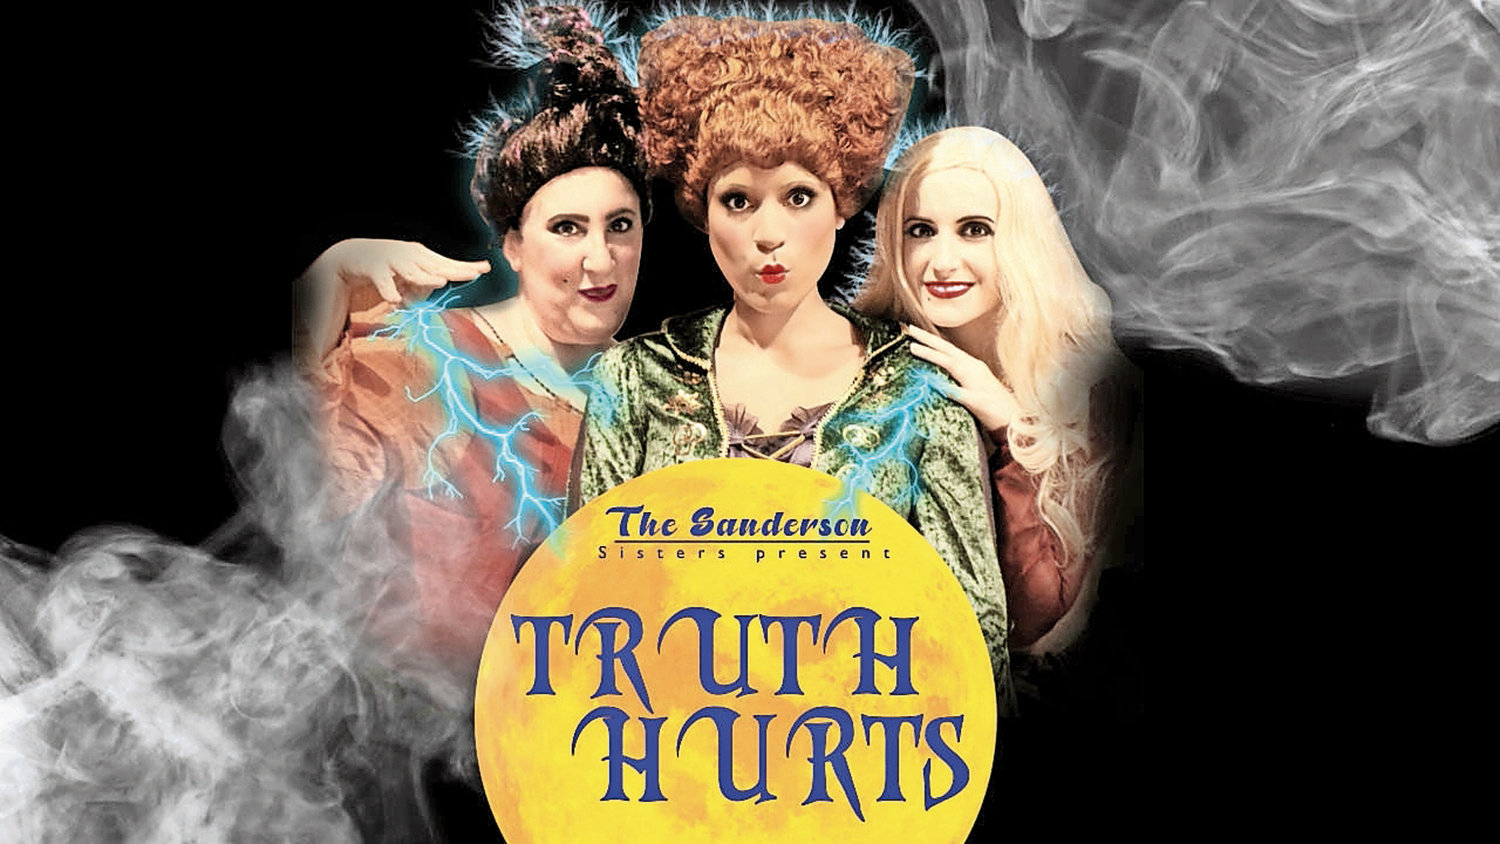 Baez, center, created a “Hocus Pocus” parody music video of “Truth Hurts” by Lizzo. She played Bette Midler’s character, Winifred Sanderson. Andrea Gallino, left, played Mary Sanderson, and Mary Baron played Sarah Sanderson.